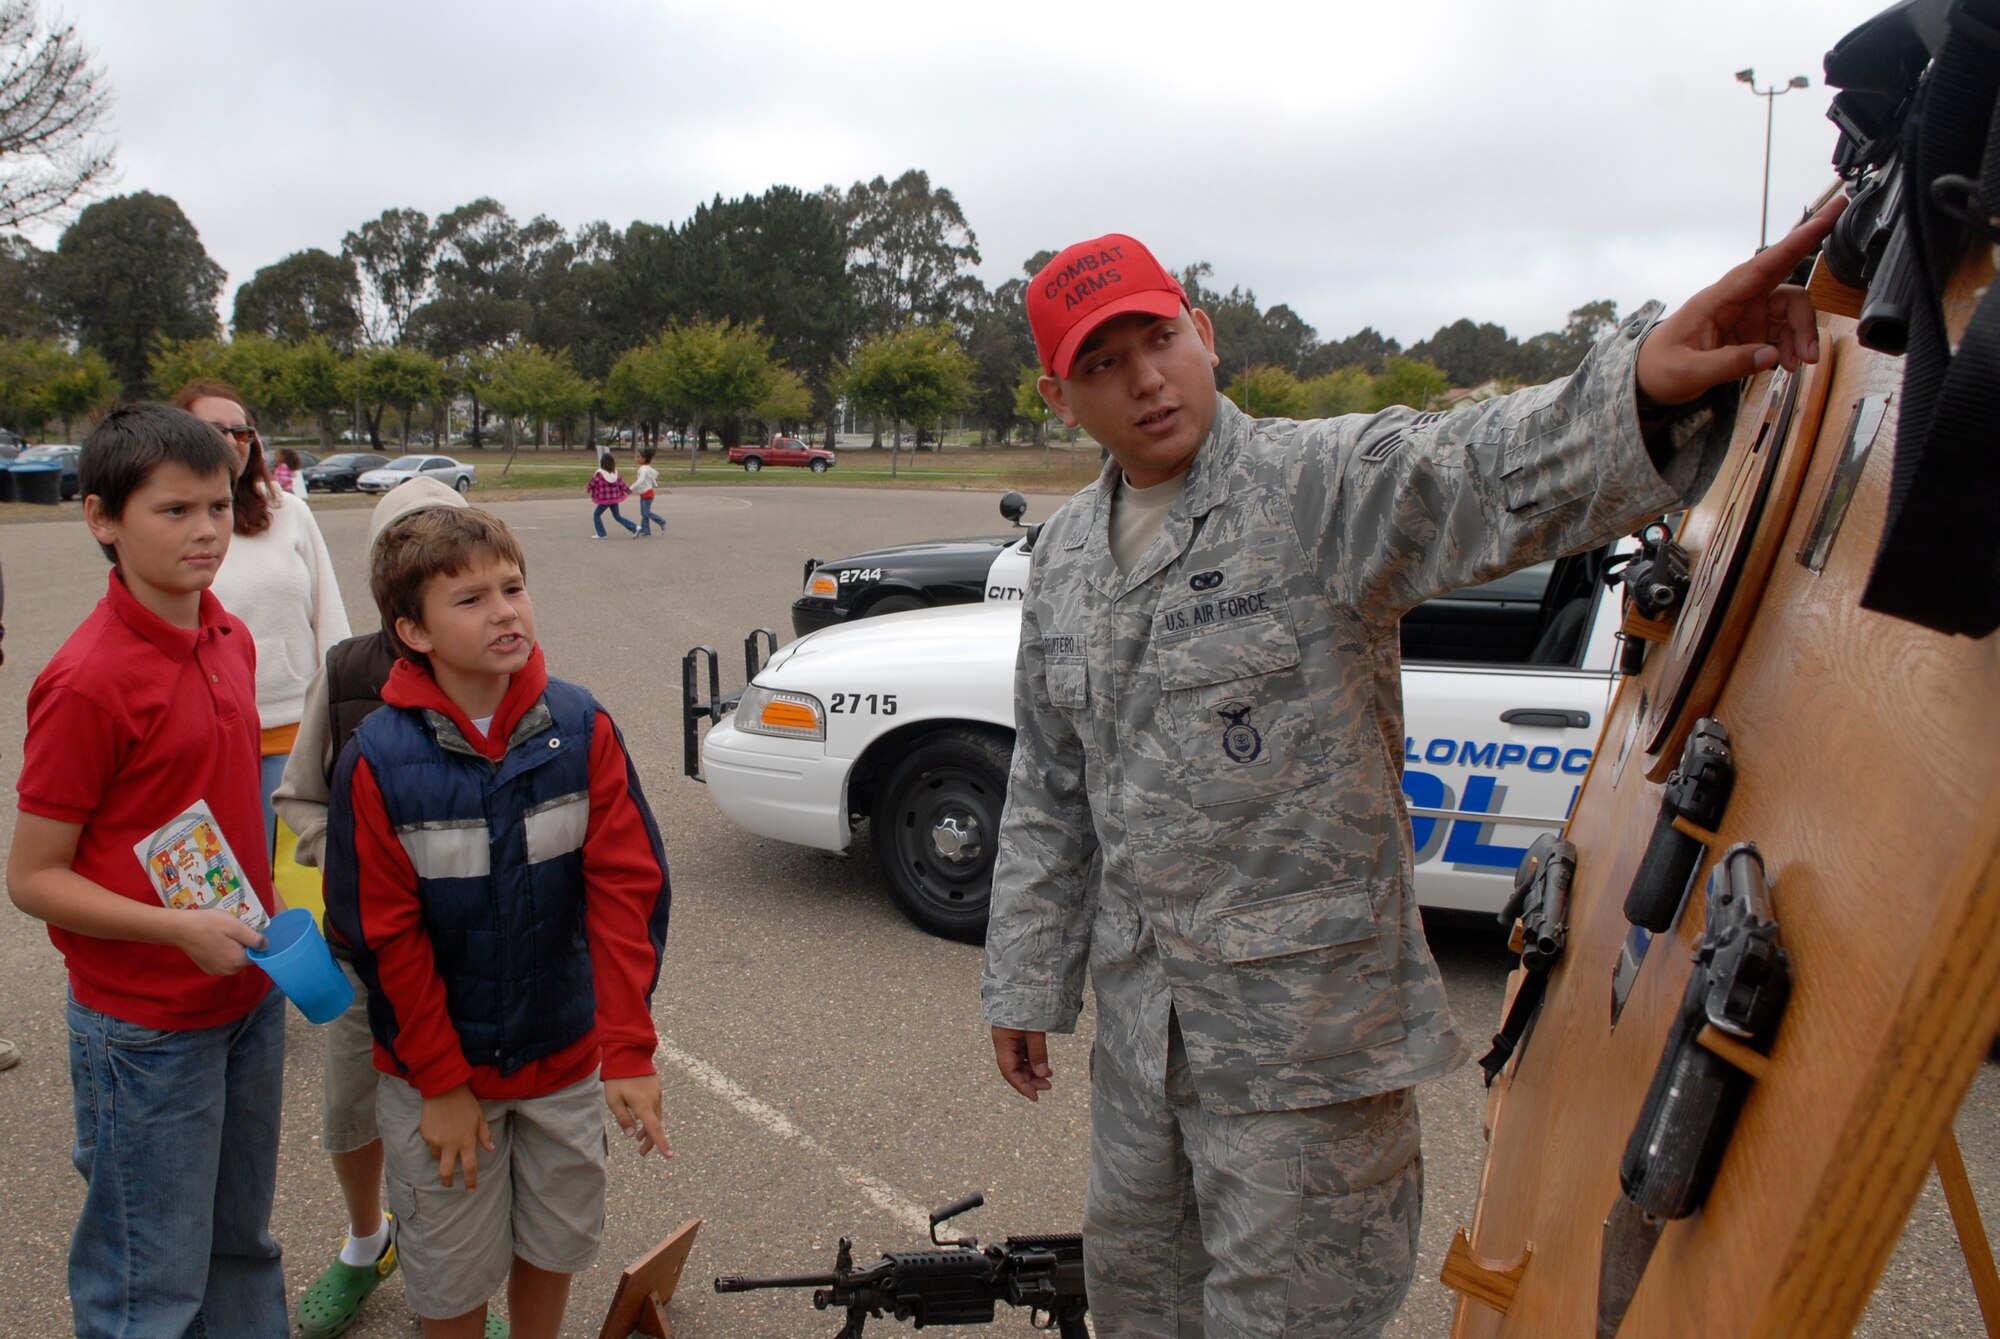 VANDENBERG AIR FORCE BASE, Calif. -- Senior Airman Gino Carruitero, a 30th Security Forces Squadron combat arms training and maintenance instructor, educates military dependents on the M203 machine gun here Friday, Aug. 27, 2010.  The National Night Out Against Crime event was hosted by the 30th SFS. (U.S. Air Force photo/Senior Airman Andrew Satran) 

 
 